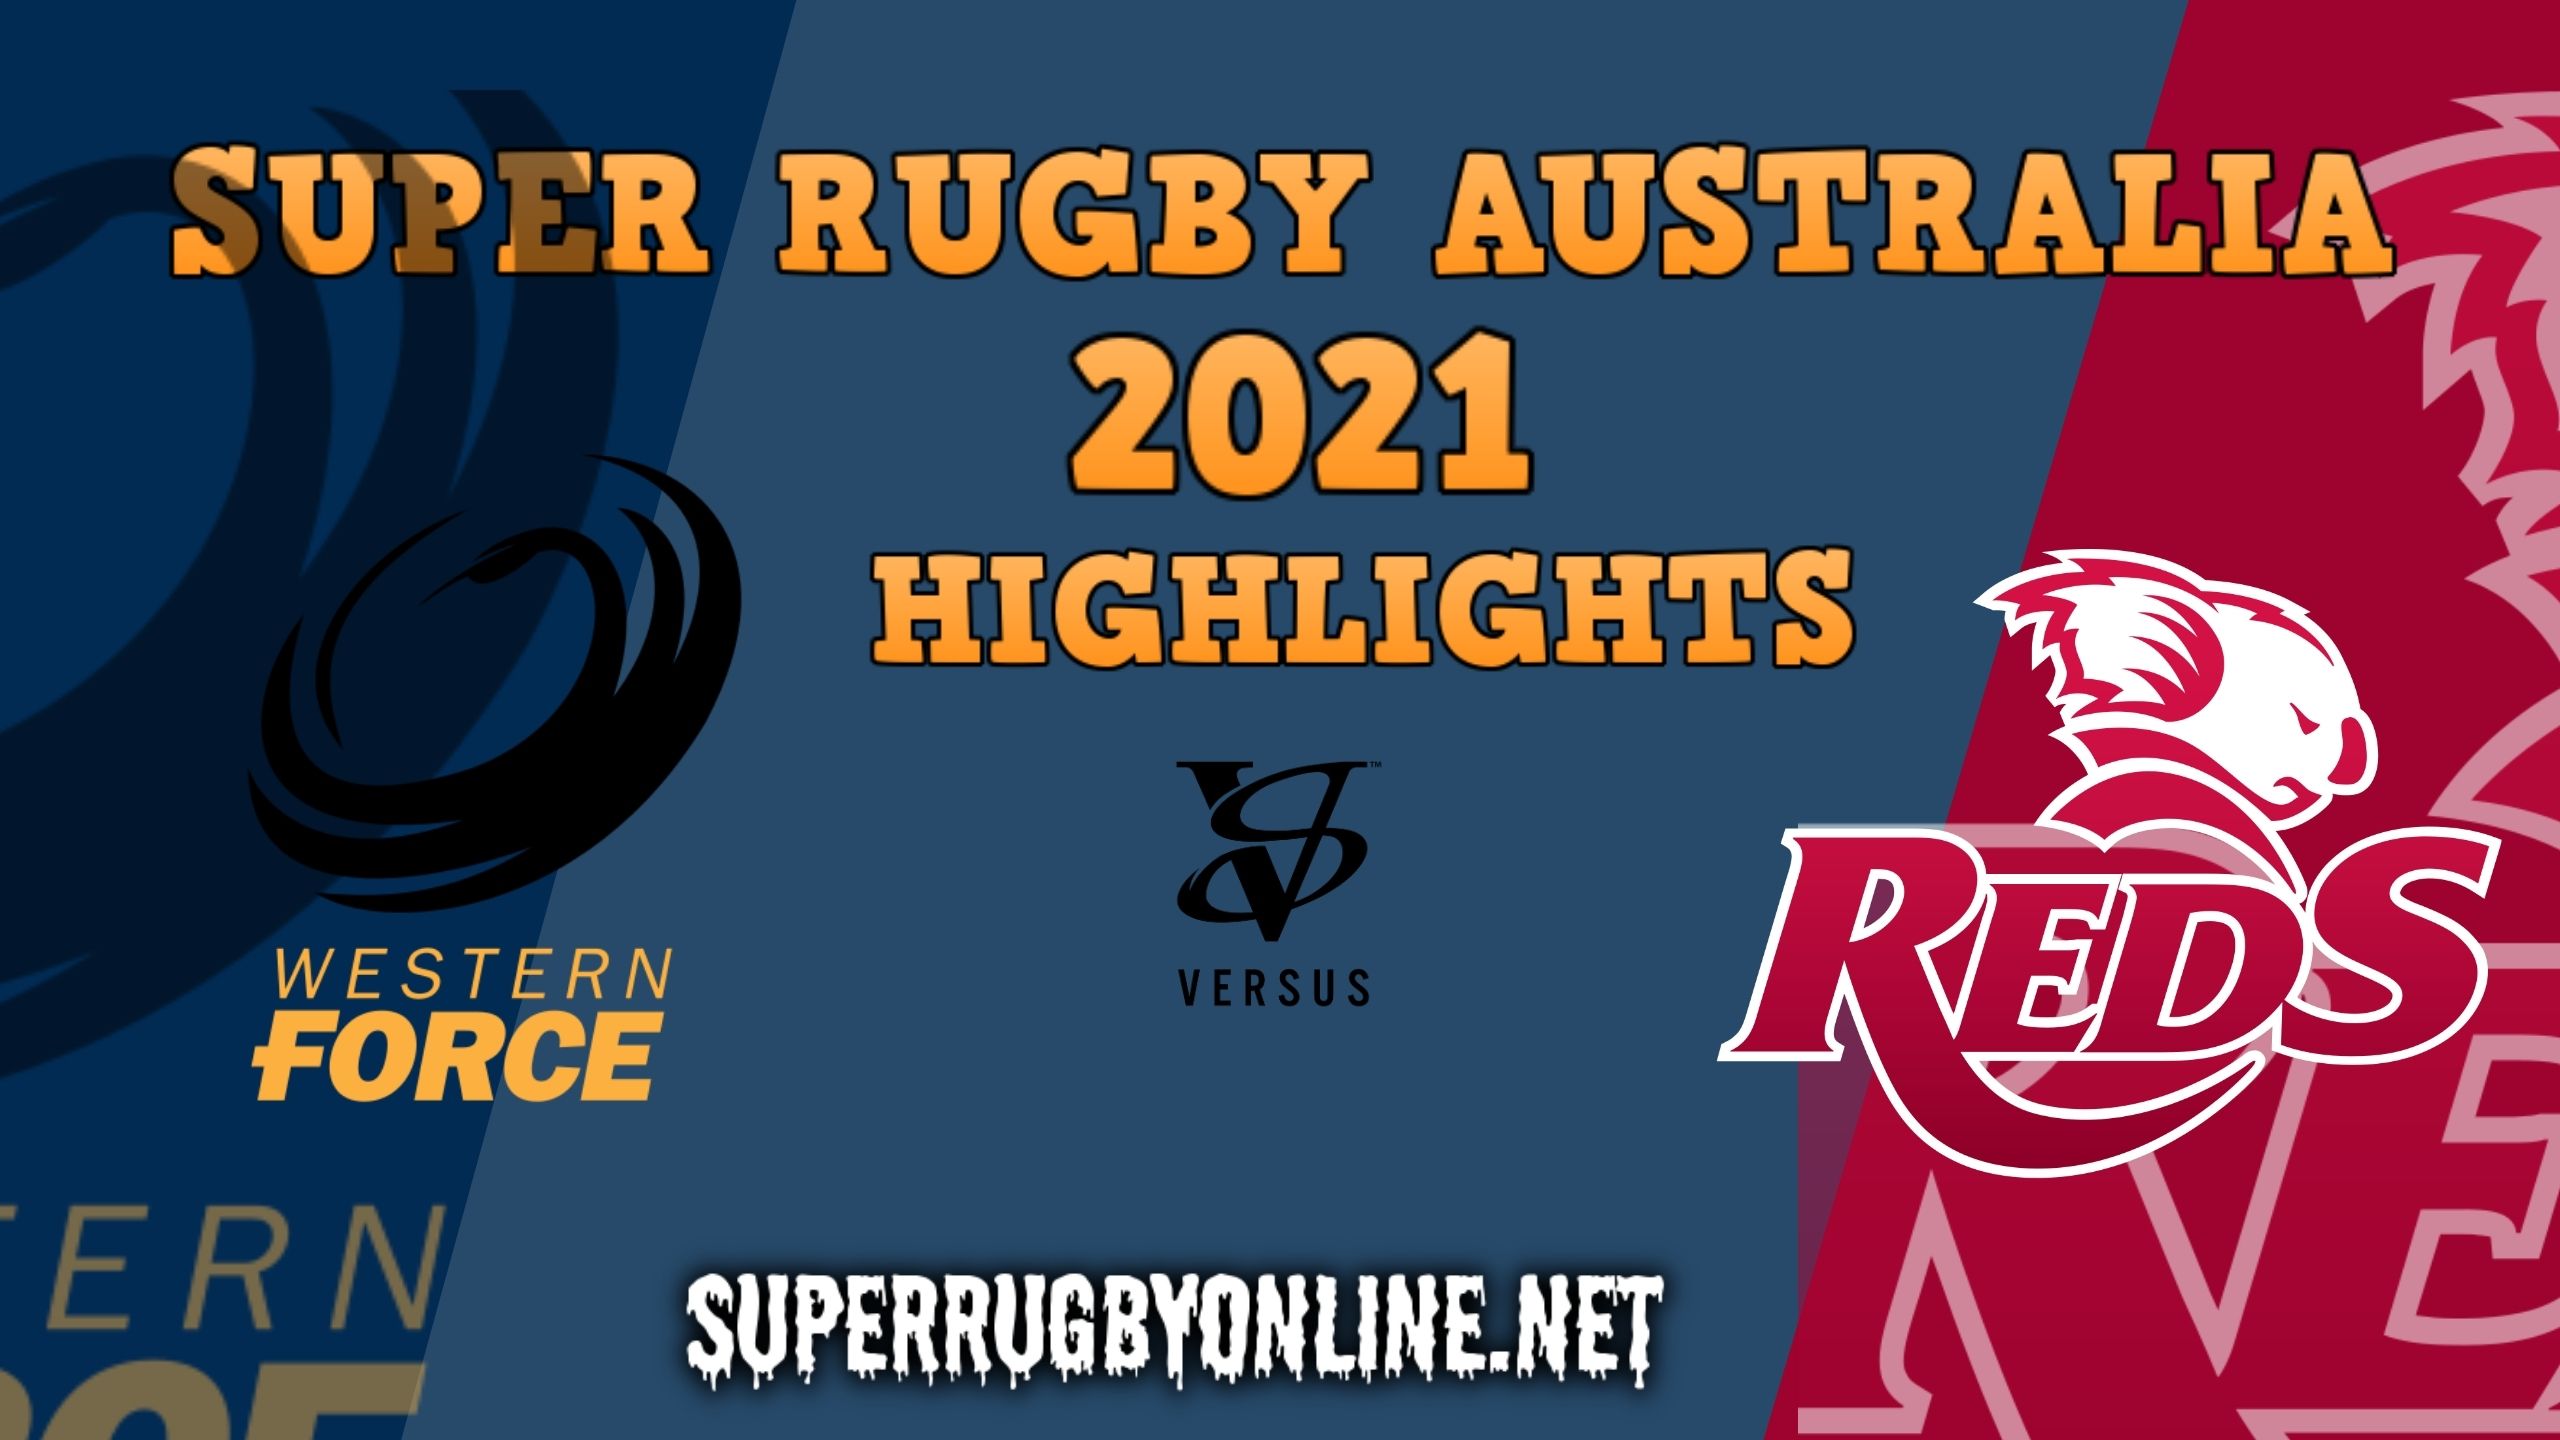 Force Vs Reds Highlights 2021 Rd 10